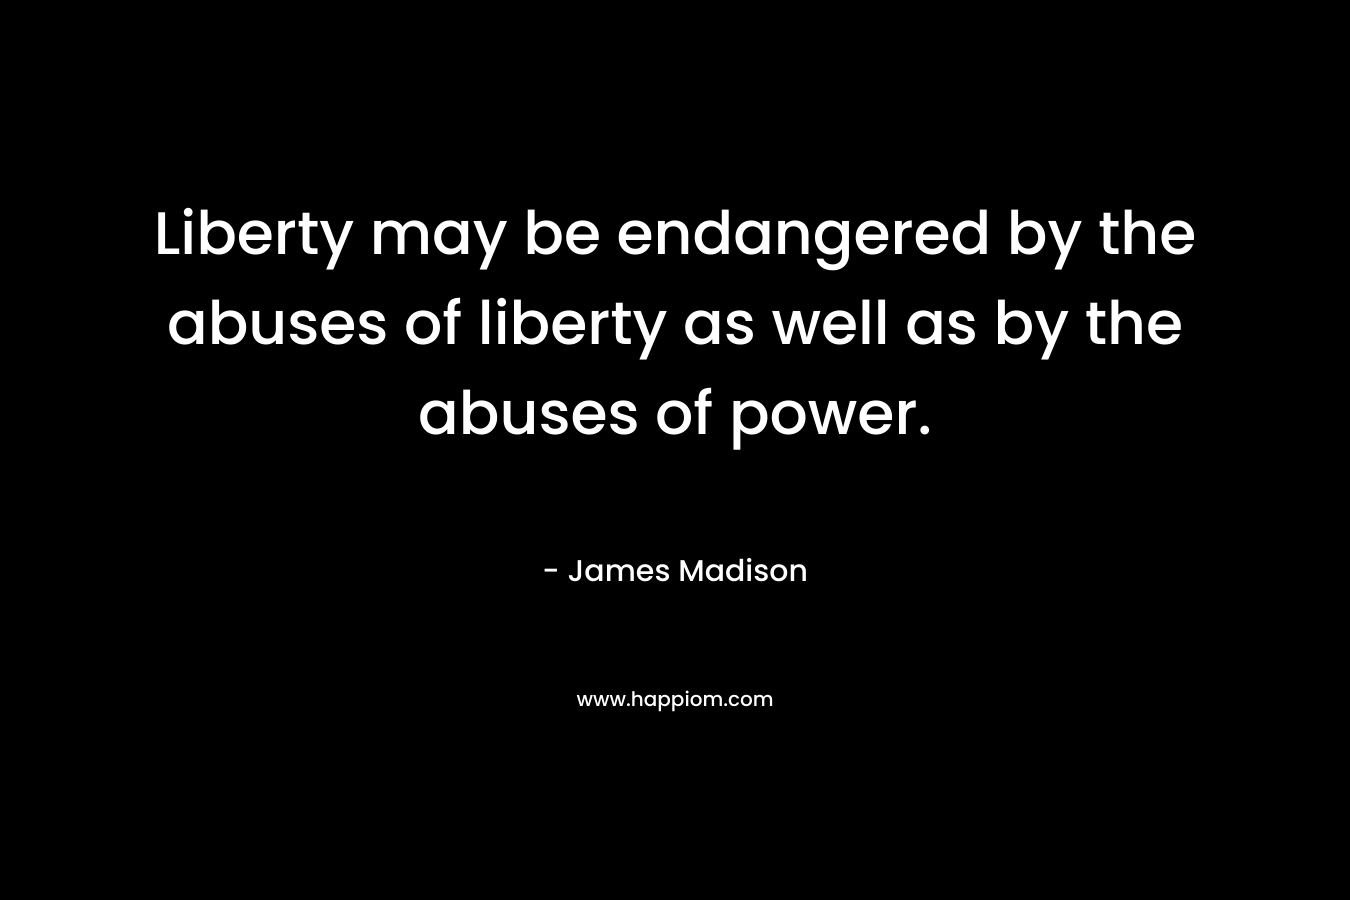 Liberty may be endangered by the abuses of liberty as well as by the abuses of power. – James Madison